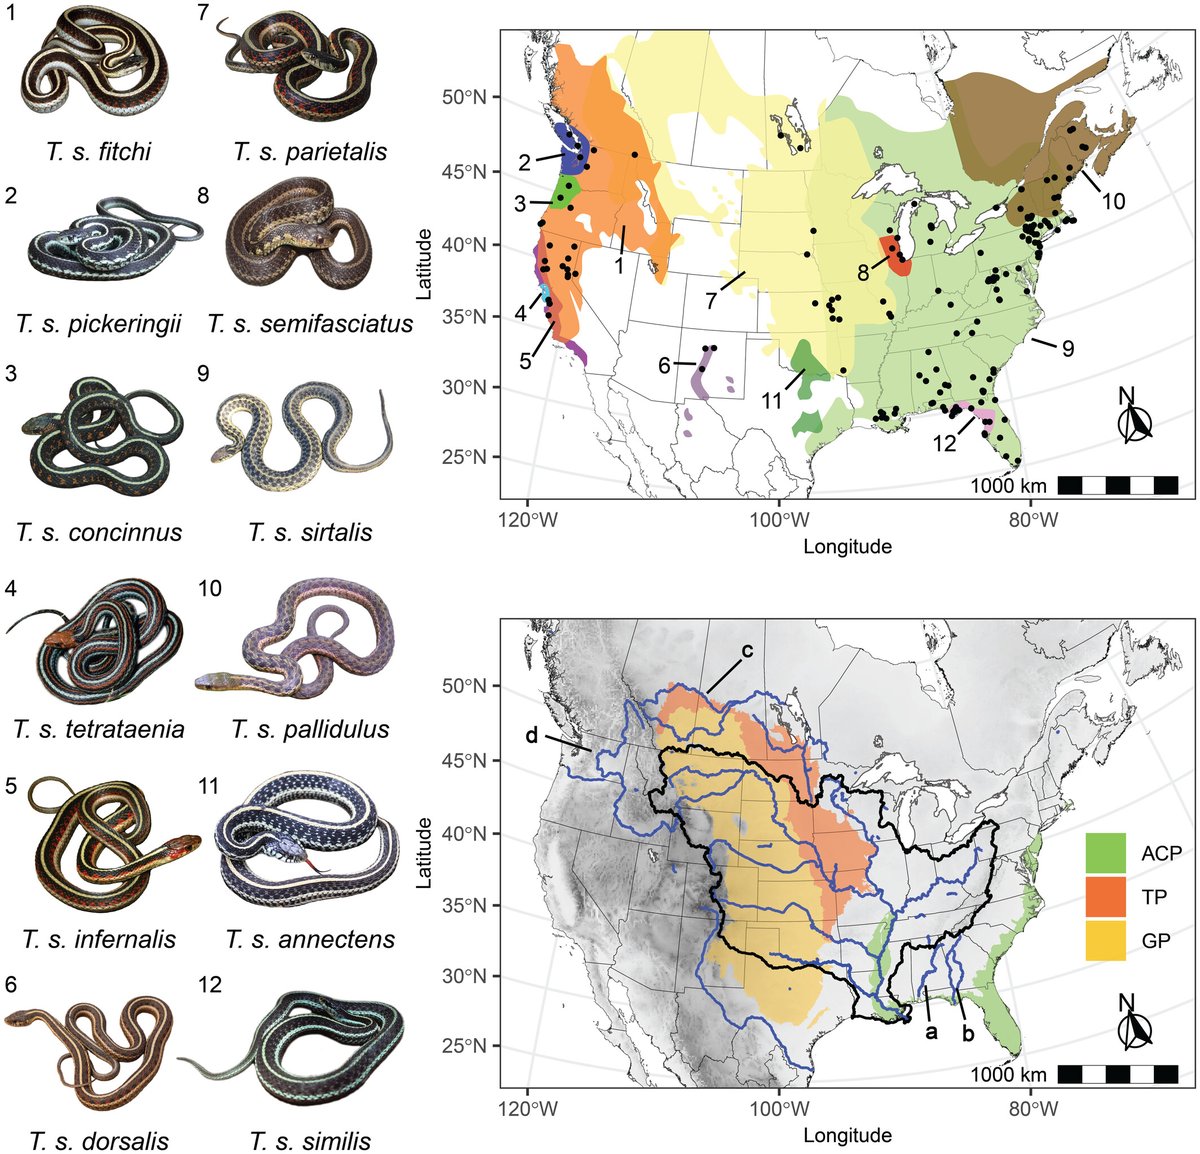 Genetic diversity and historical range shifts of the common gartersnake in North America. Four distinct lineages were identified, suggesting a Pliocene origin and complex expansion patterns influenced by major rivers and climate changes. doi.org/10.1111/jbi.14…